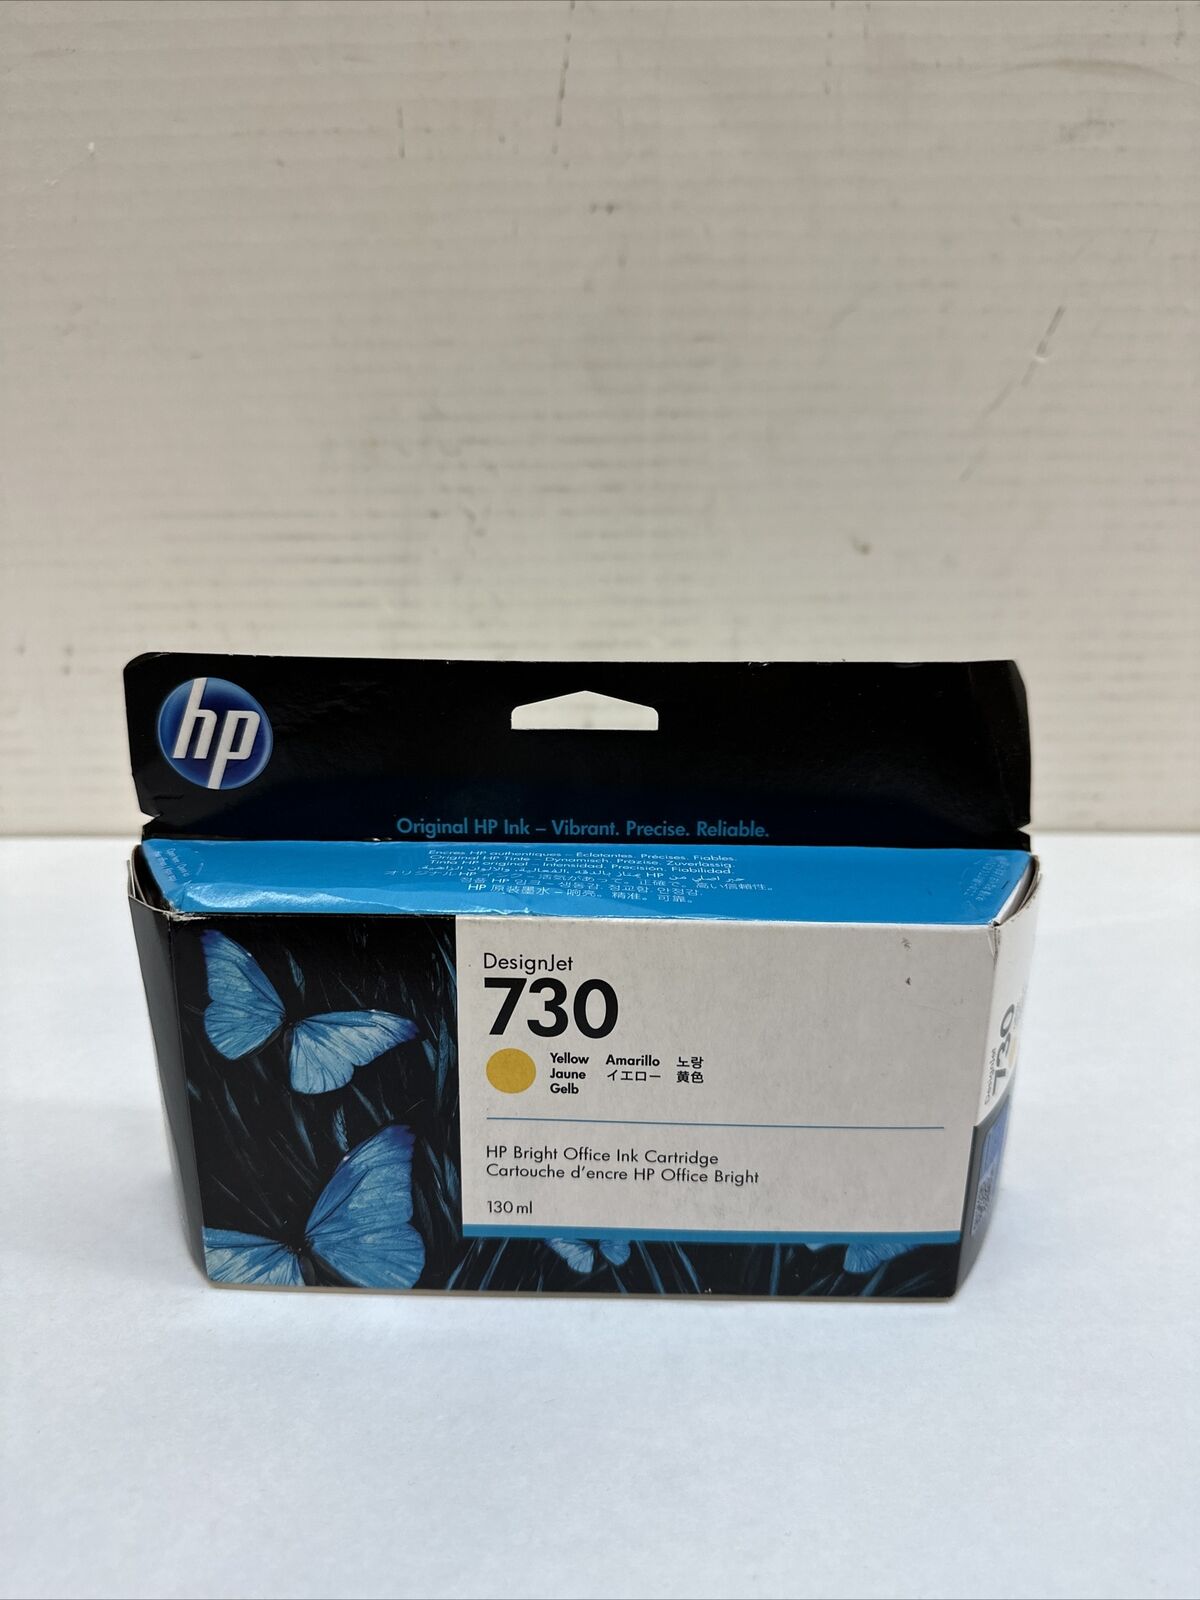 NEW SEALED HP Design Jet 730 Ink Yellow P2V64A EXP Jan 2026